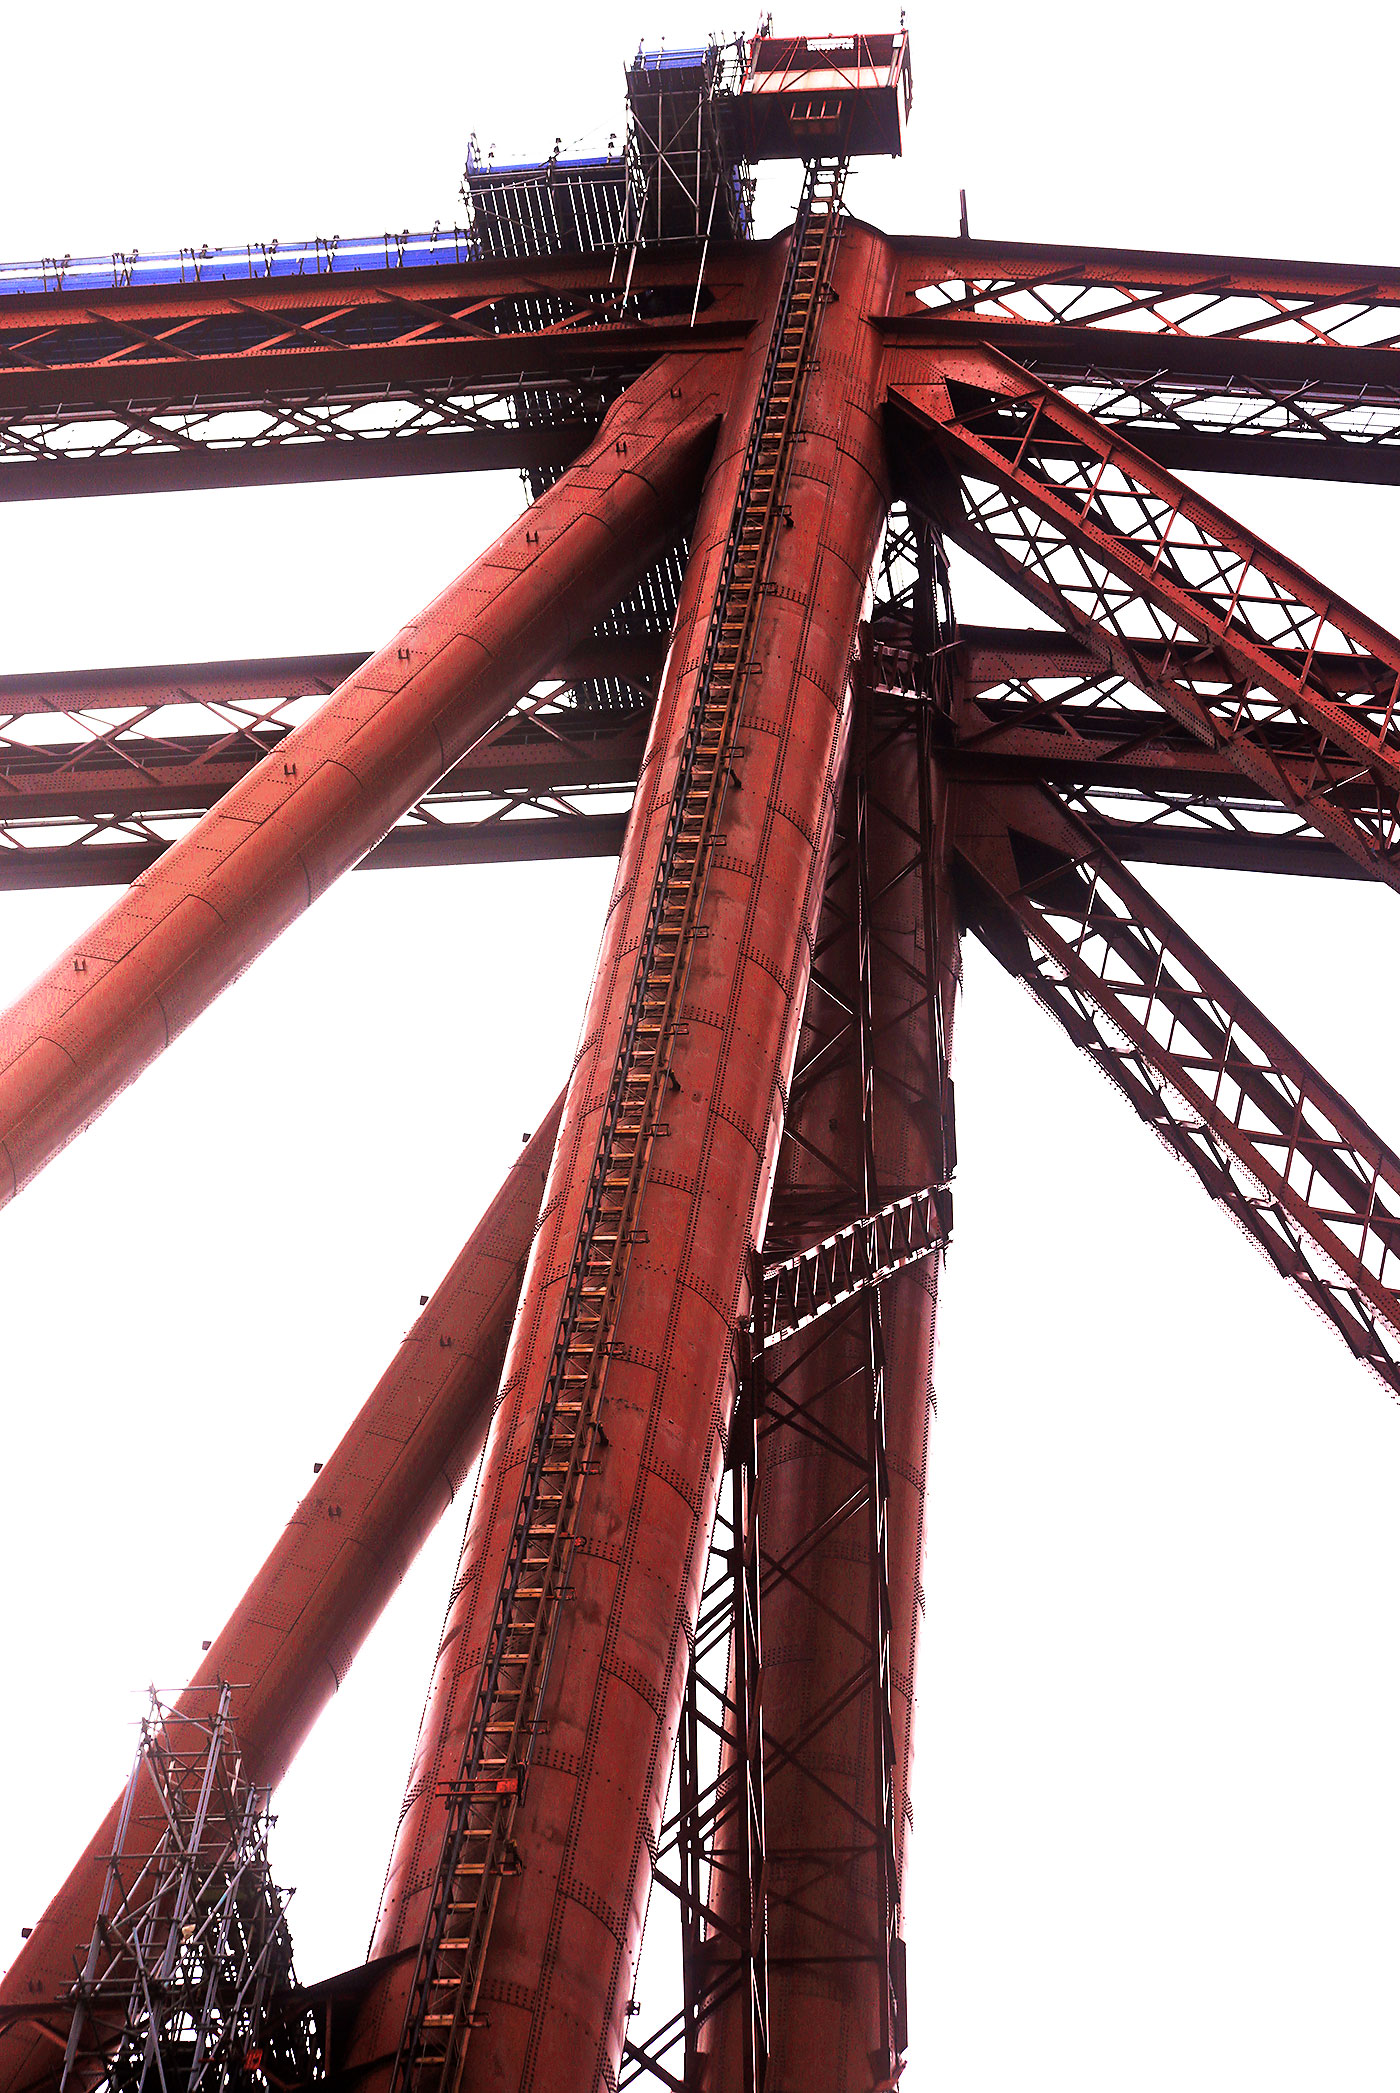 The Forth Bridge and Lift to the top of the North Cantilever  -  North Queensferry